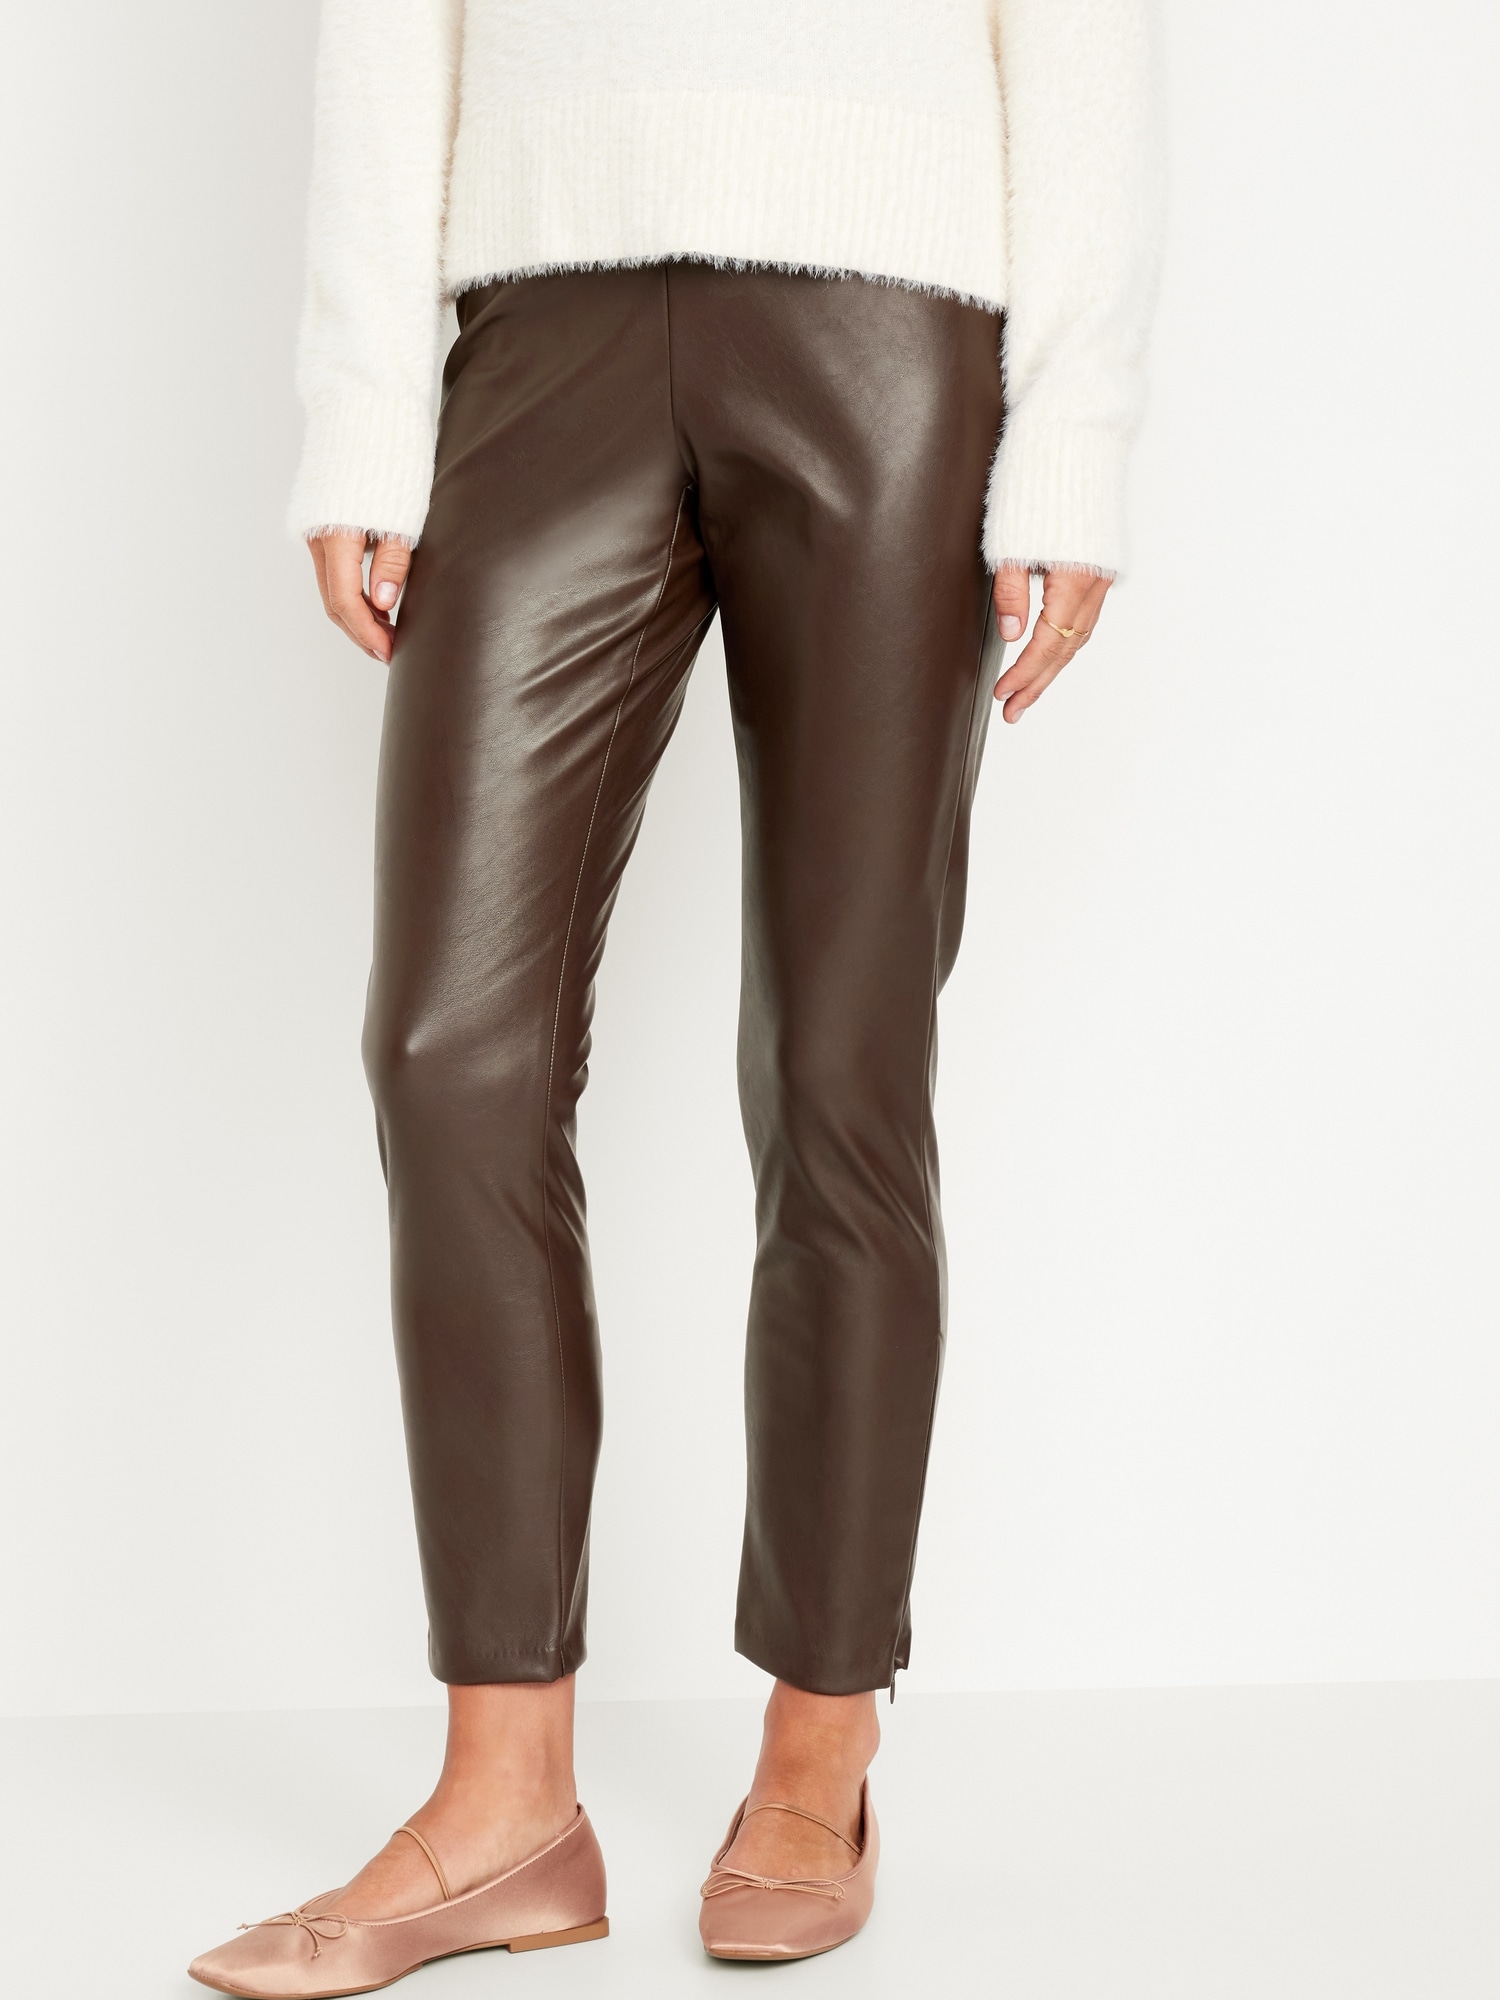 Old Navy Women's Extra High-Waisted Faux Leather Pants - - Size 12